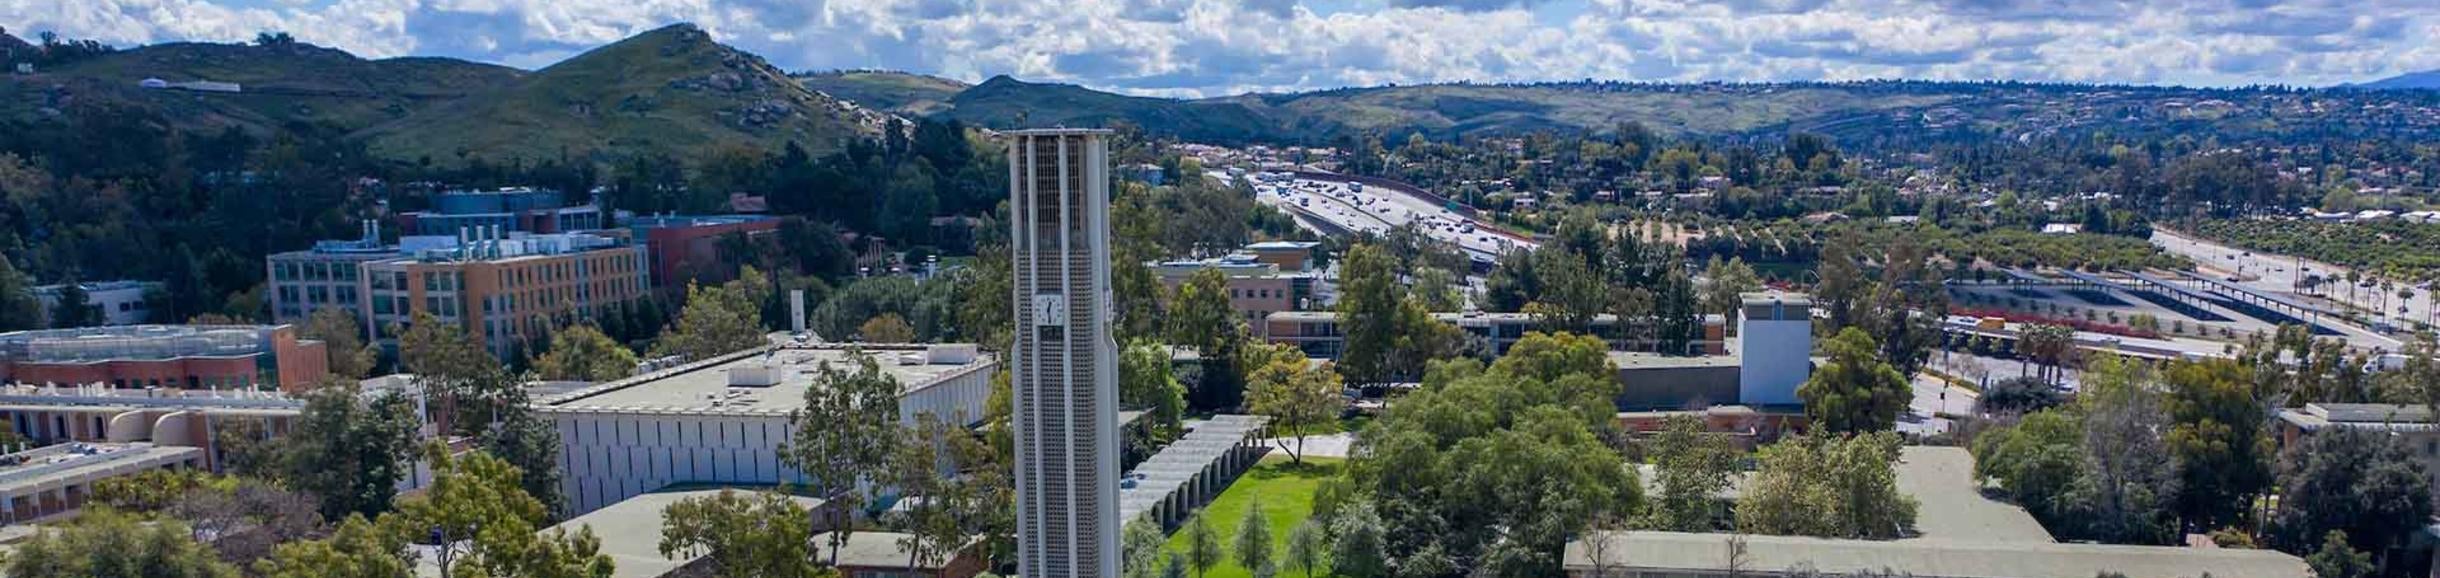 Aerial view of the UCR campus